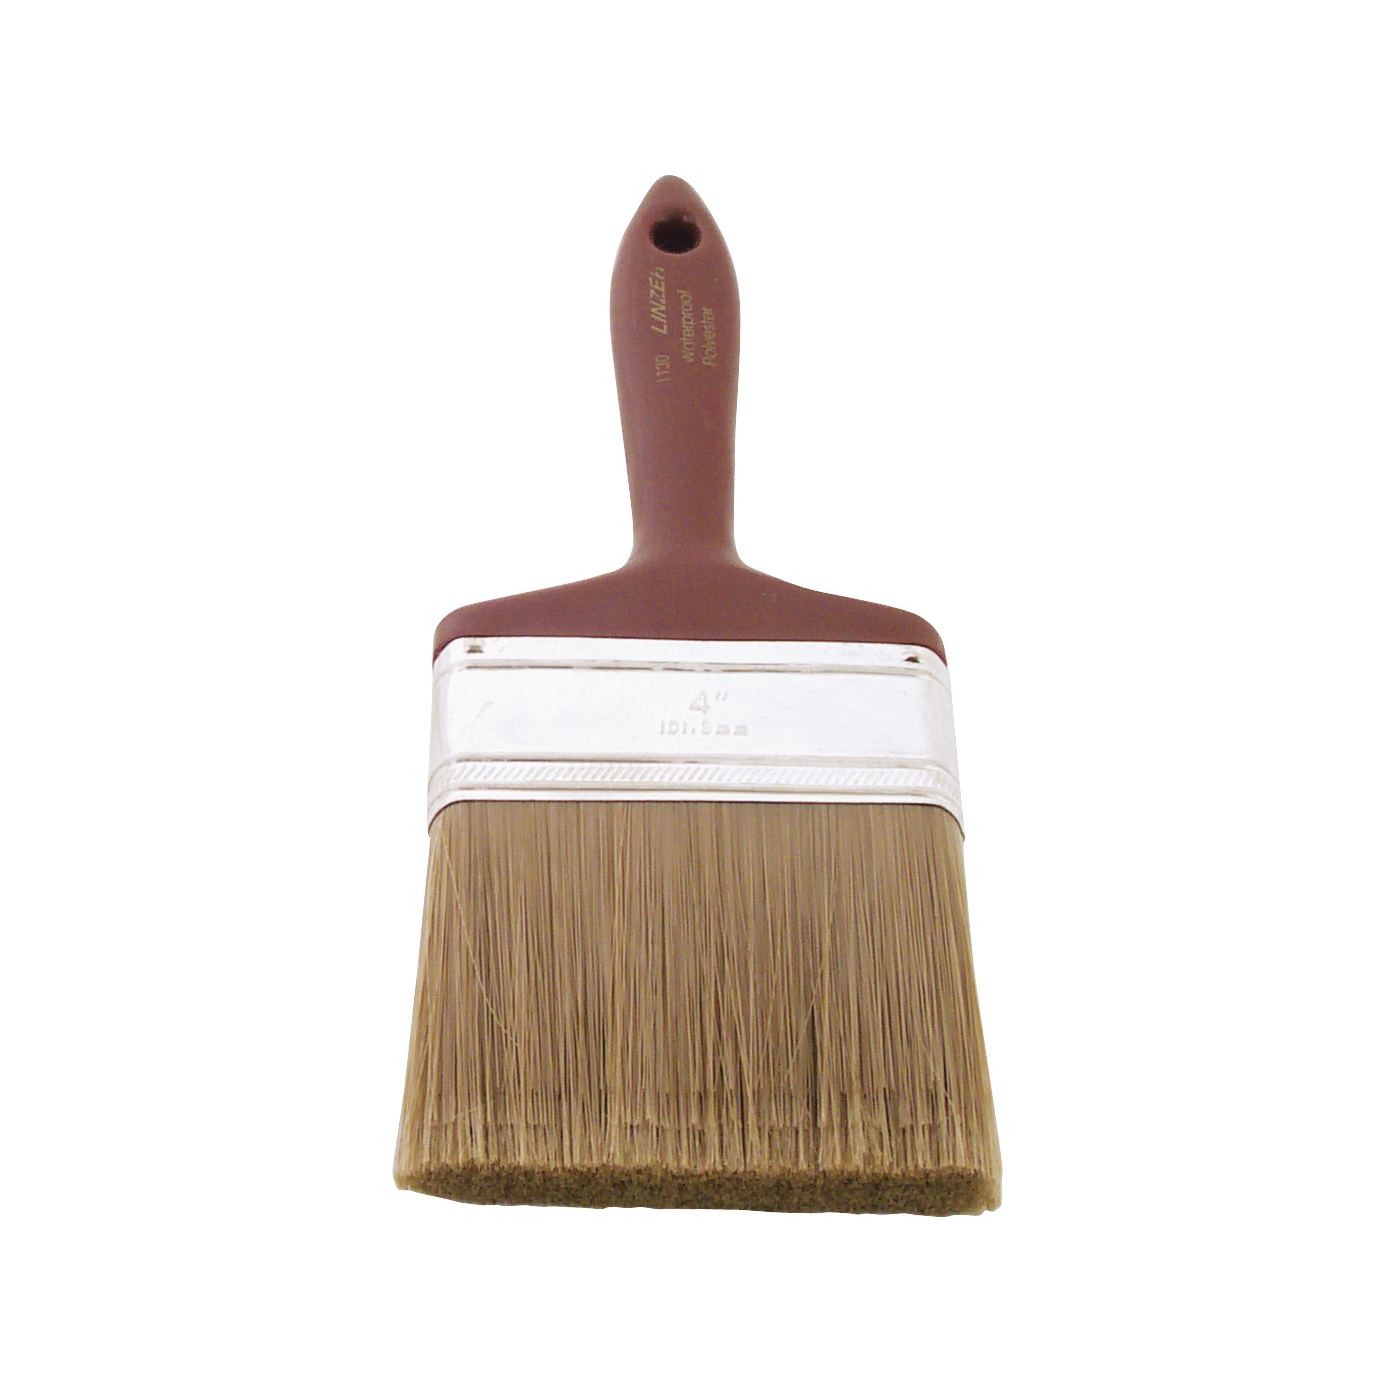 3121-4 Paint Brush, 4 in W, 3 in L Bristle, Polyester Bristle, Beaver Tail Handle